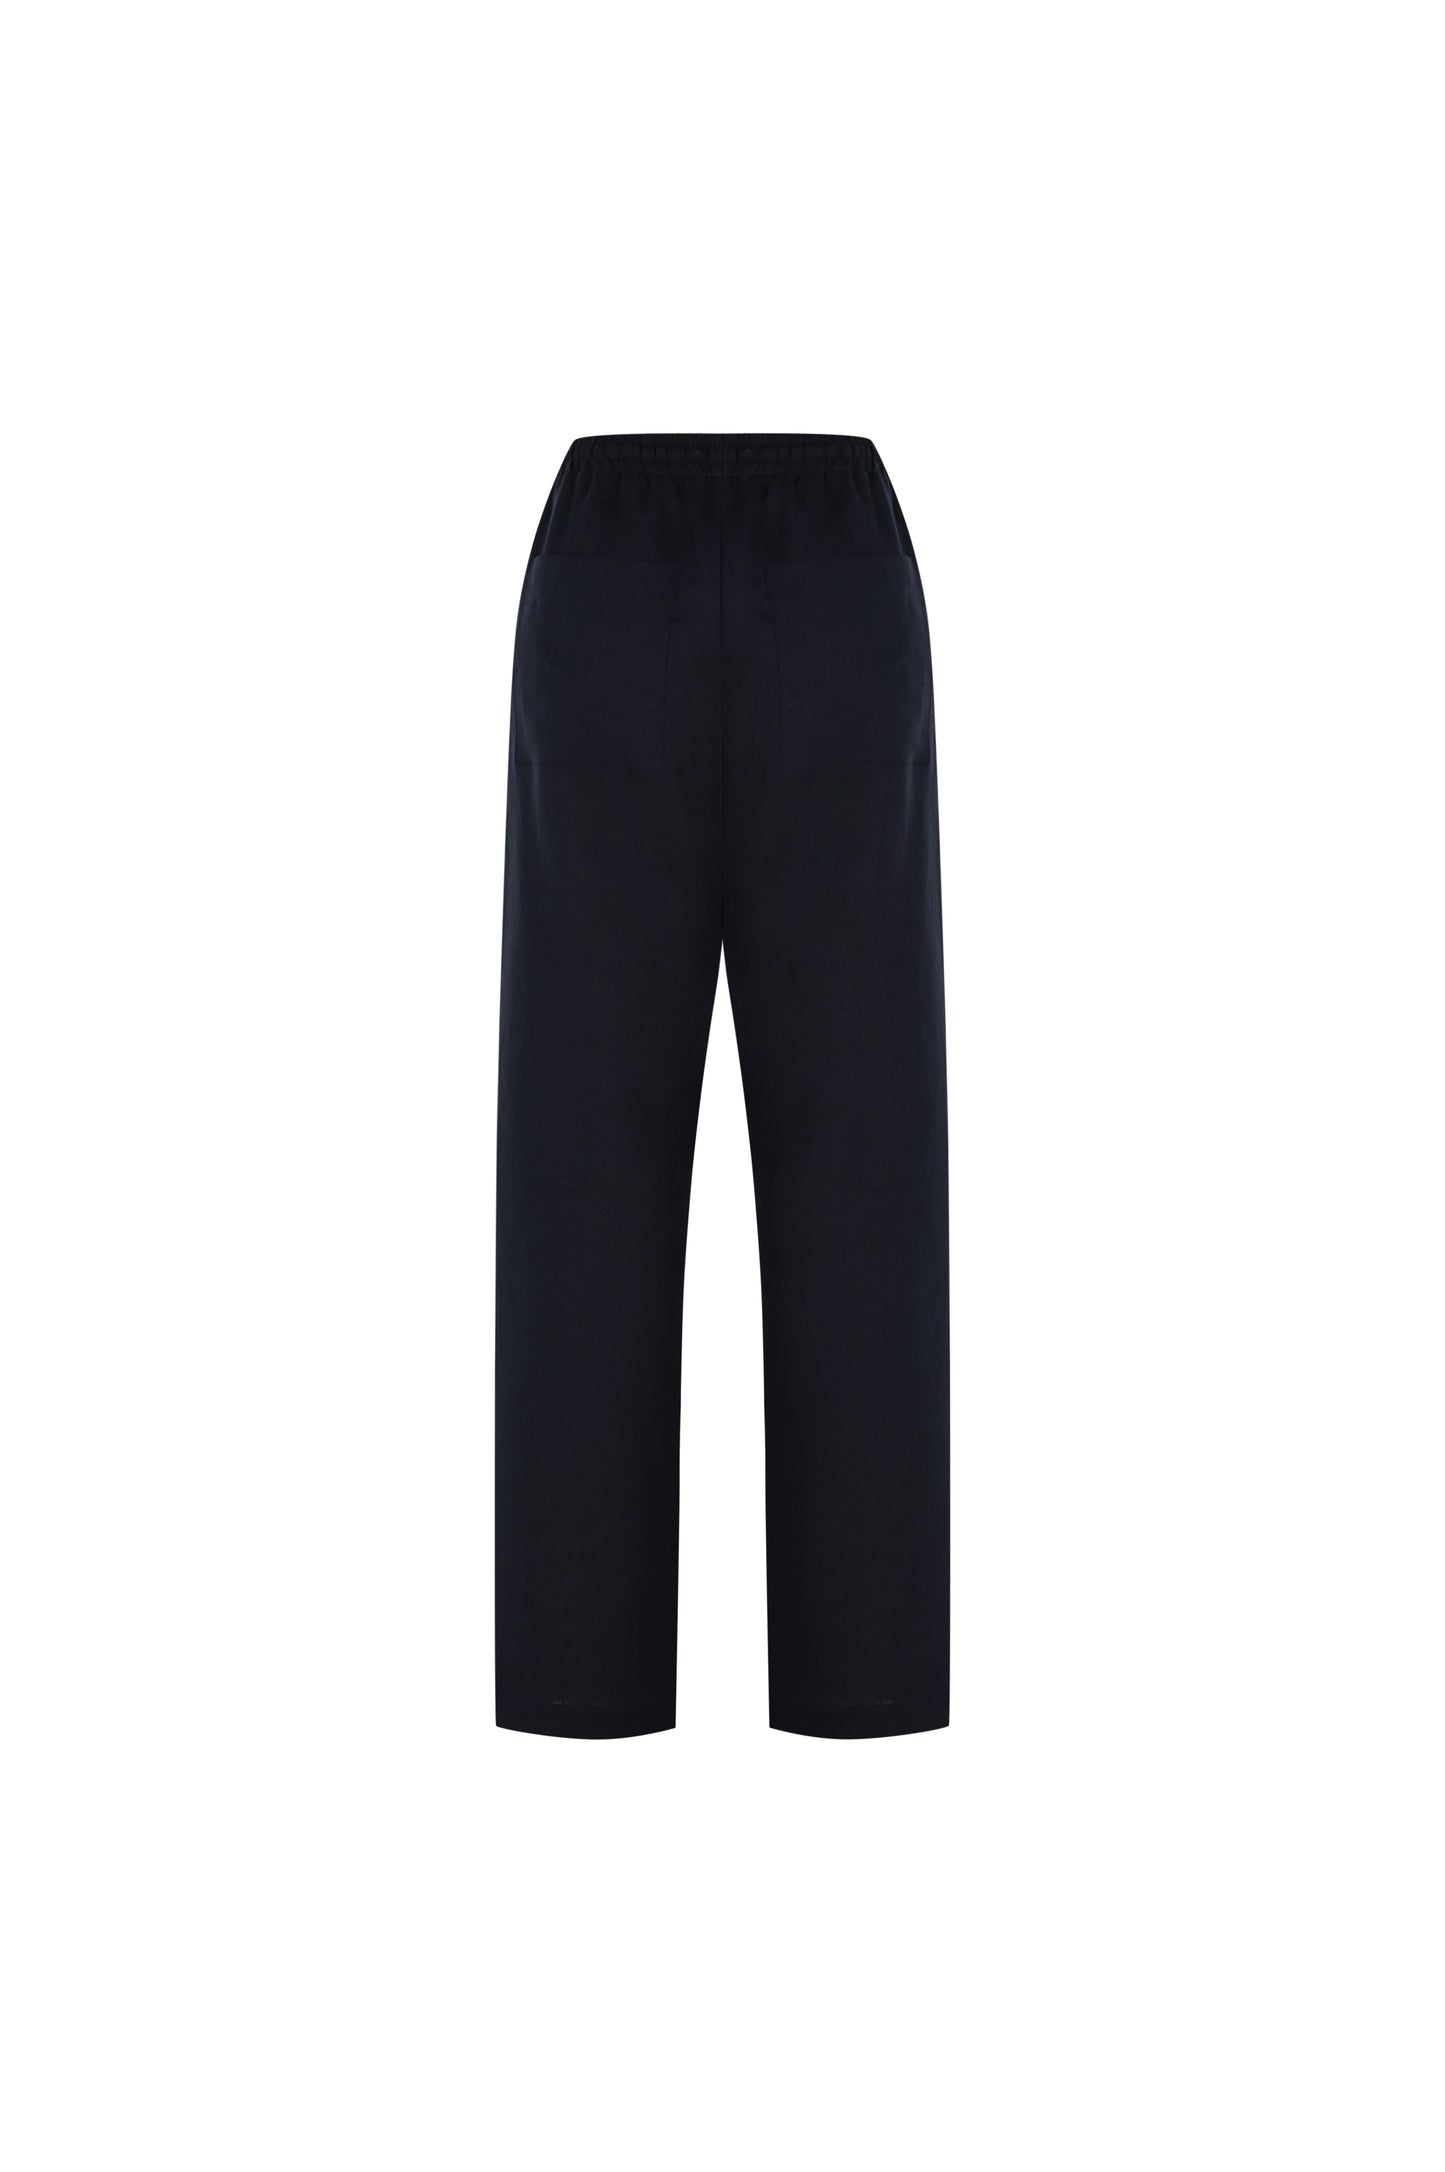 COSMOS LOOSE-FIT NAVY  LINEN PANTS